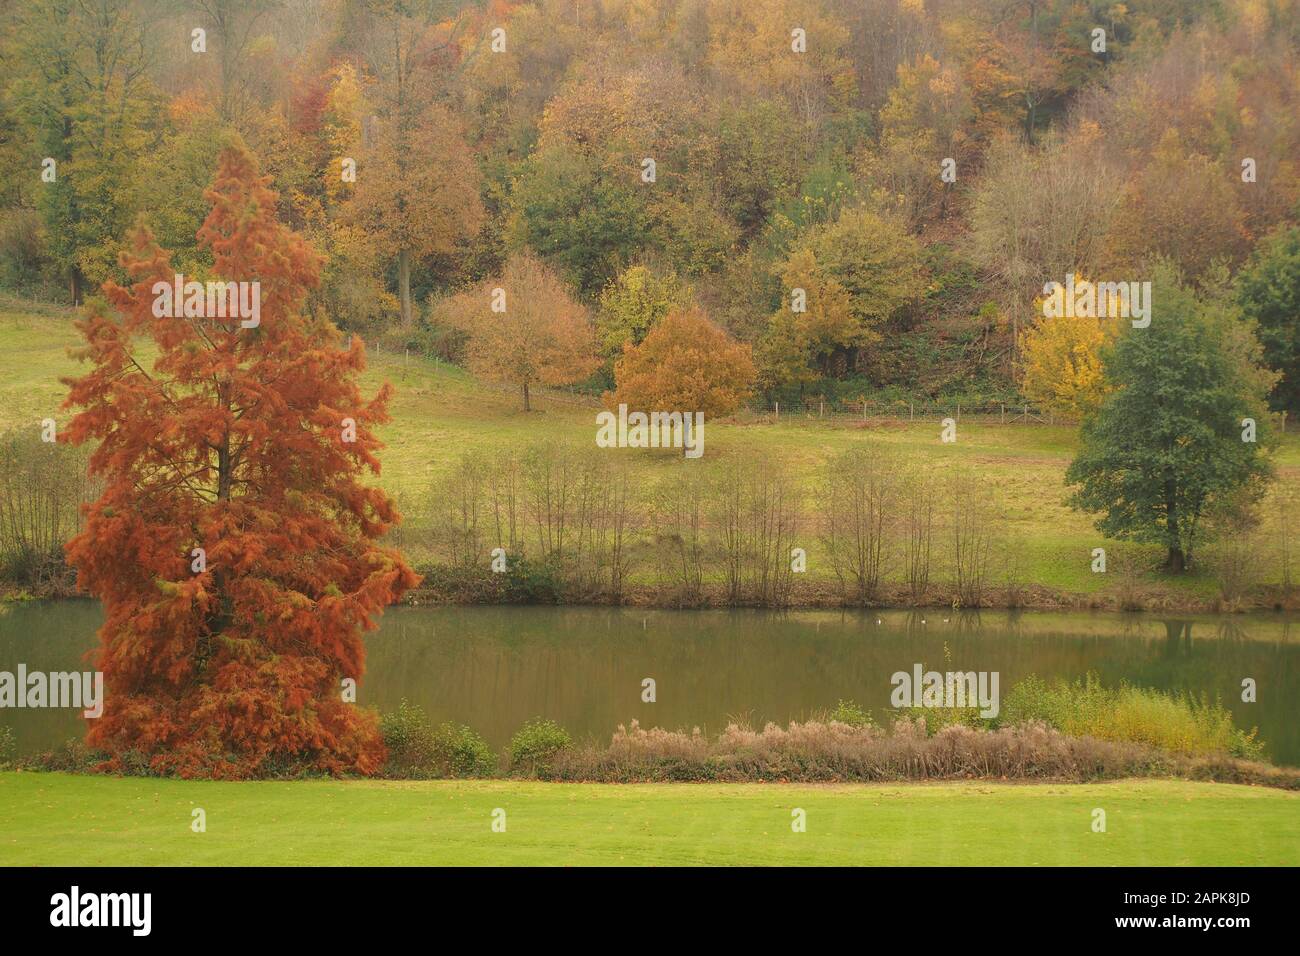 A view across an autumn garden across a lawn down to a lake with trees beyond in their autumn colours Stock Photo